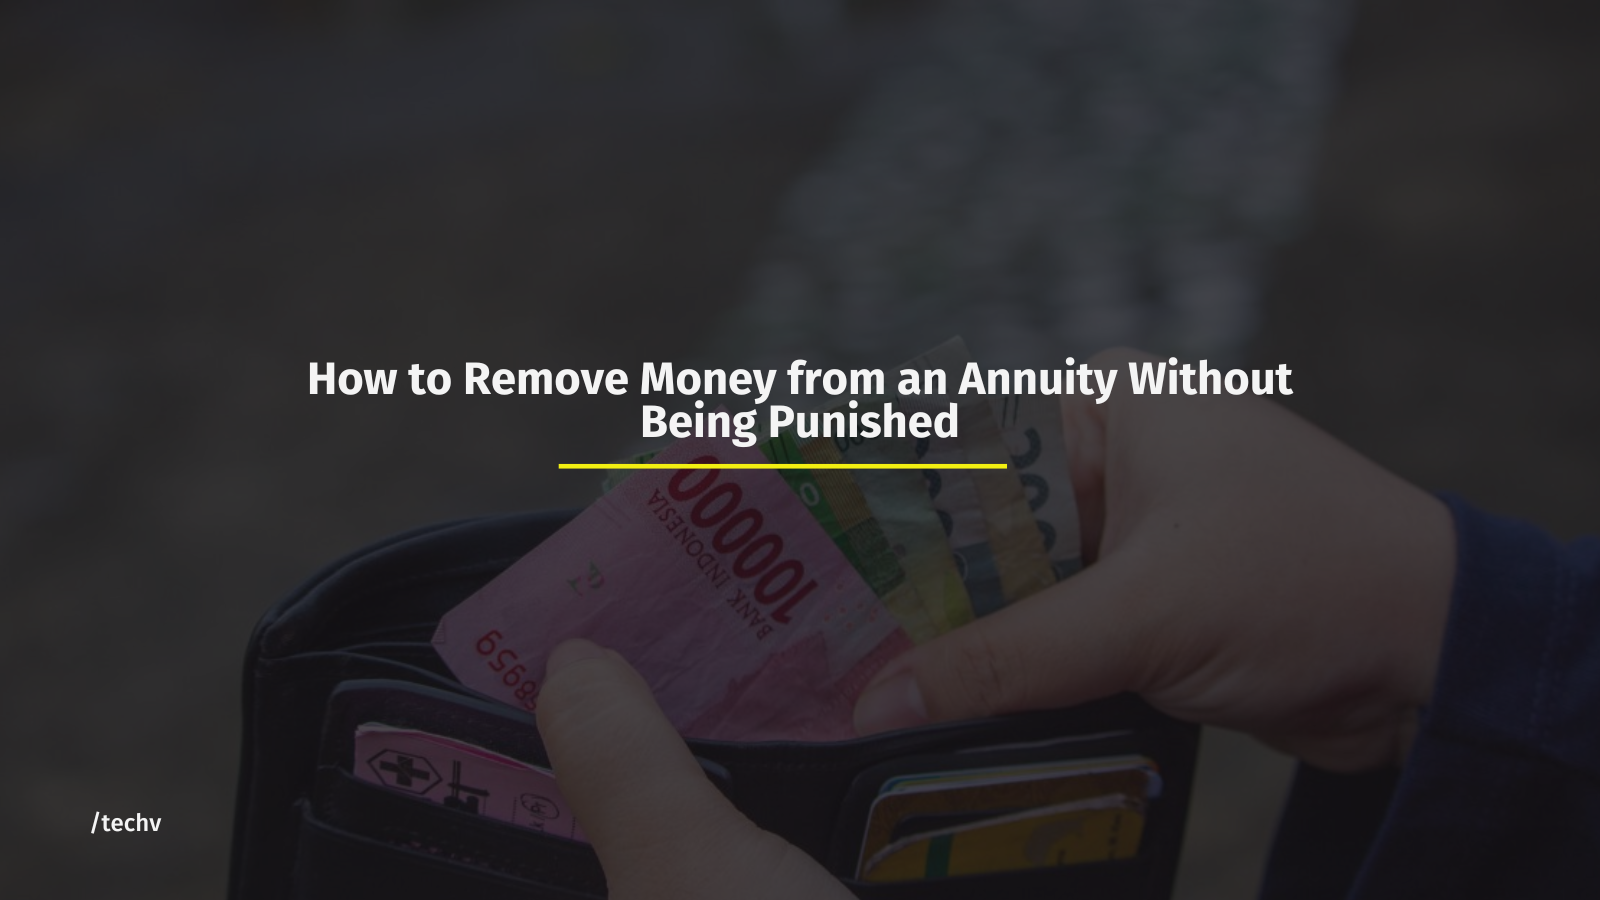 How to Remove Money from an Annuity Without Being Punished